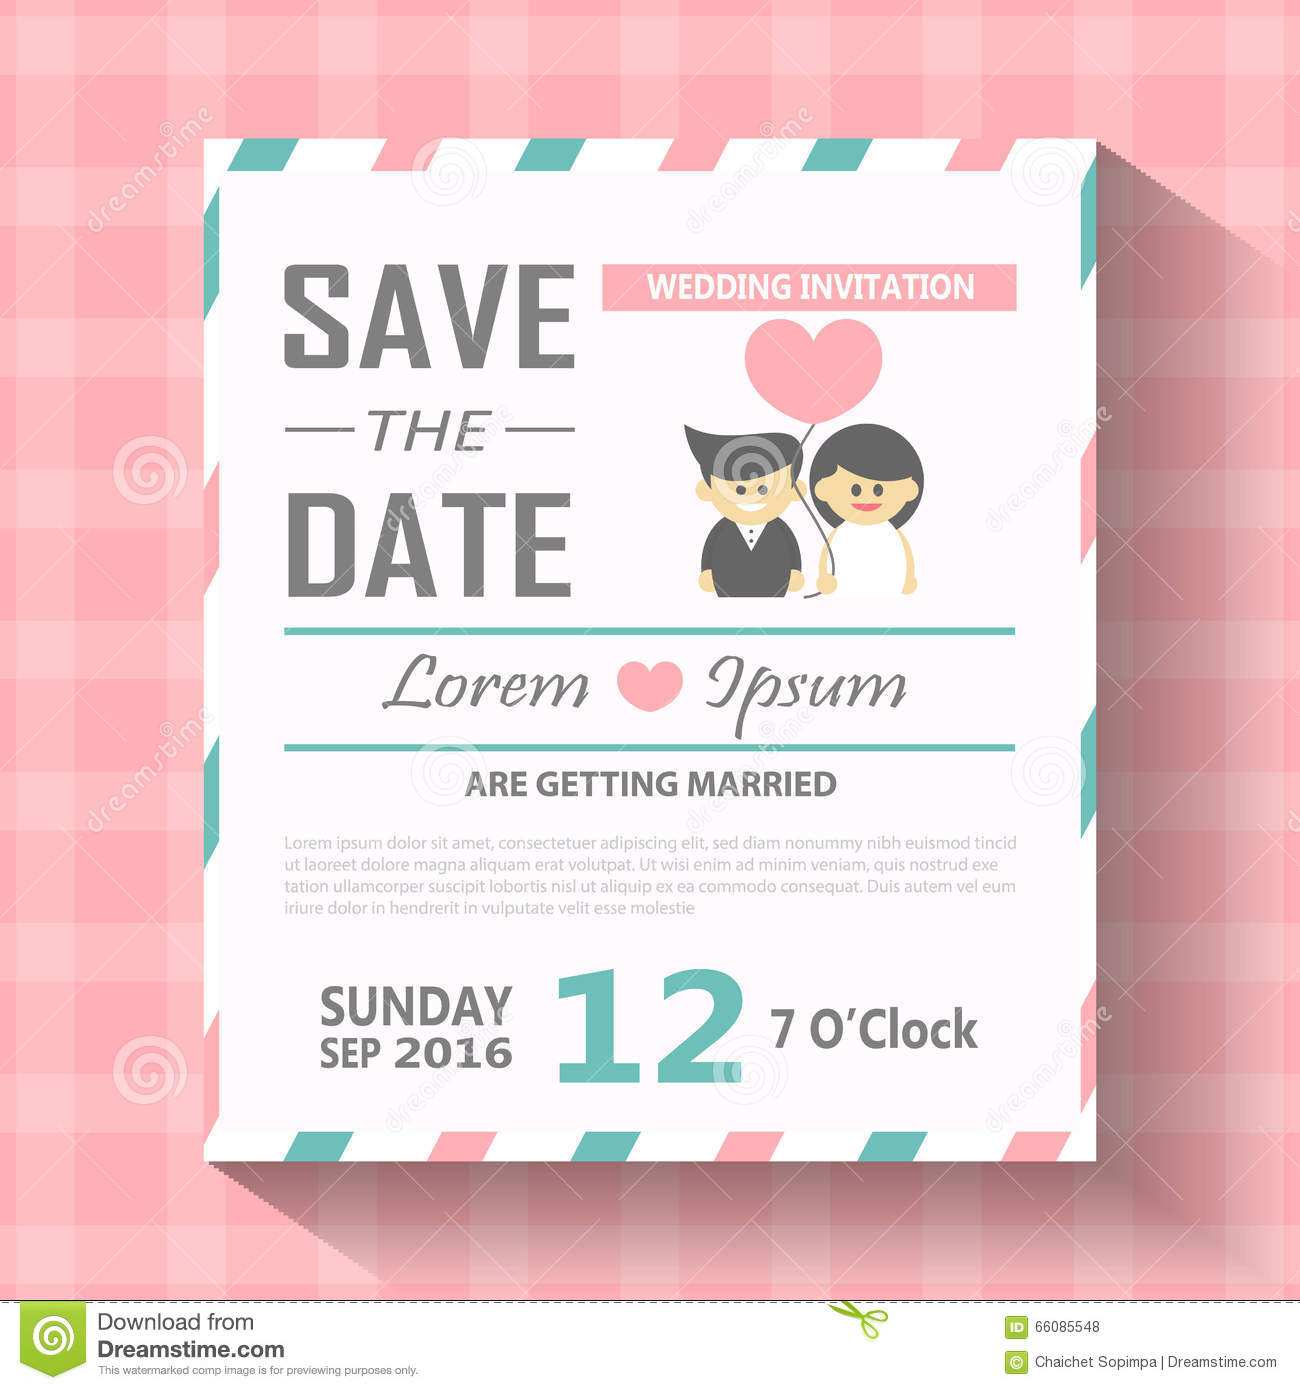 53 Online Invitation Card Samples Vector Photo by Invitation Card Samples Vector